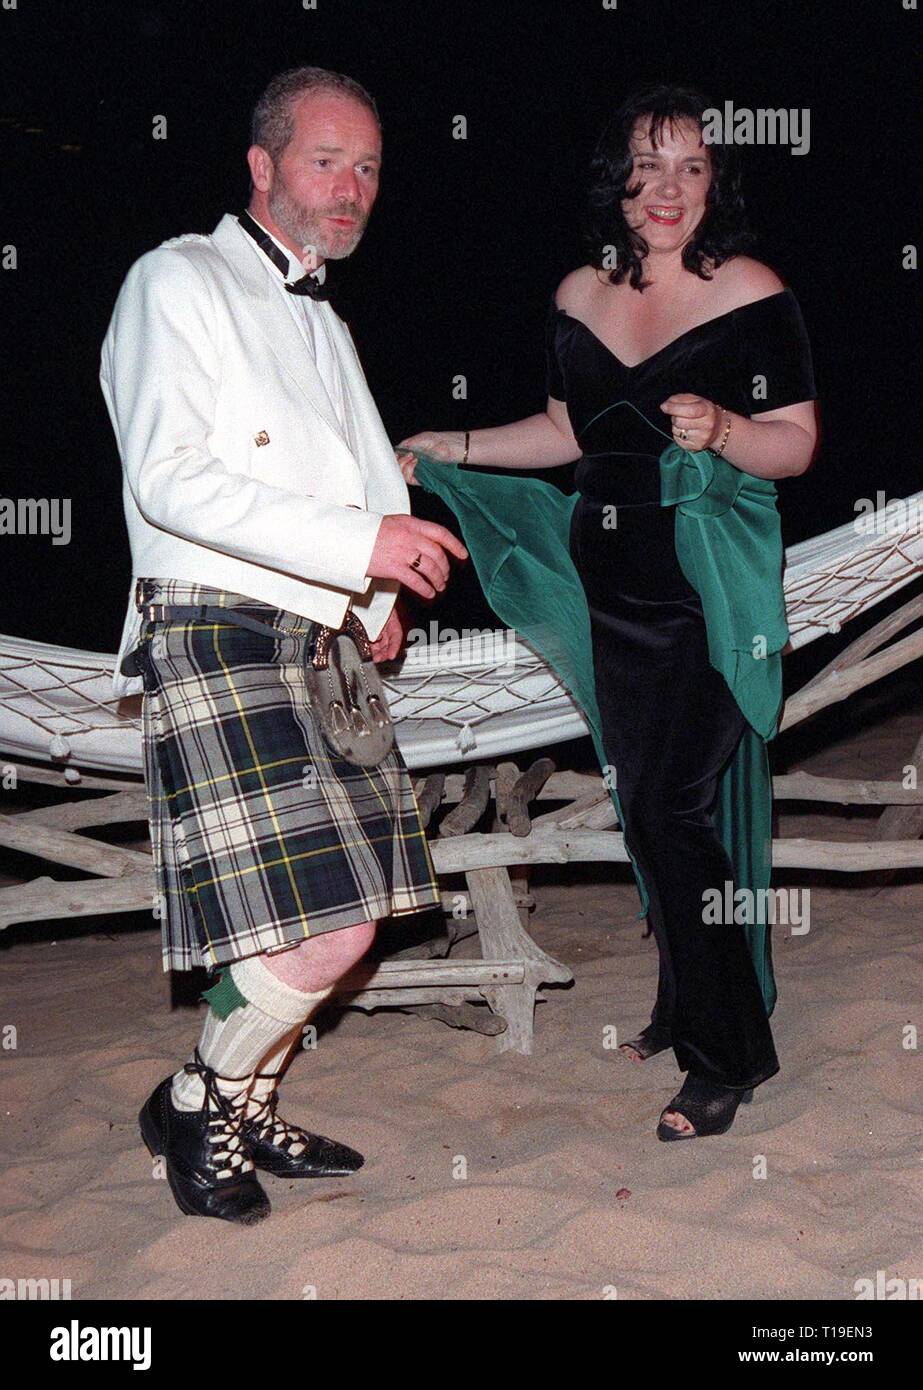 CANNES, FRANCE - May 24, 1998:  Cannes Best Actor winner PETER MULLAN celebrates his award by dancing on the beach with his wife ANNIE. Stock Photo